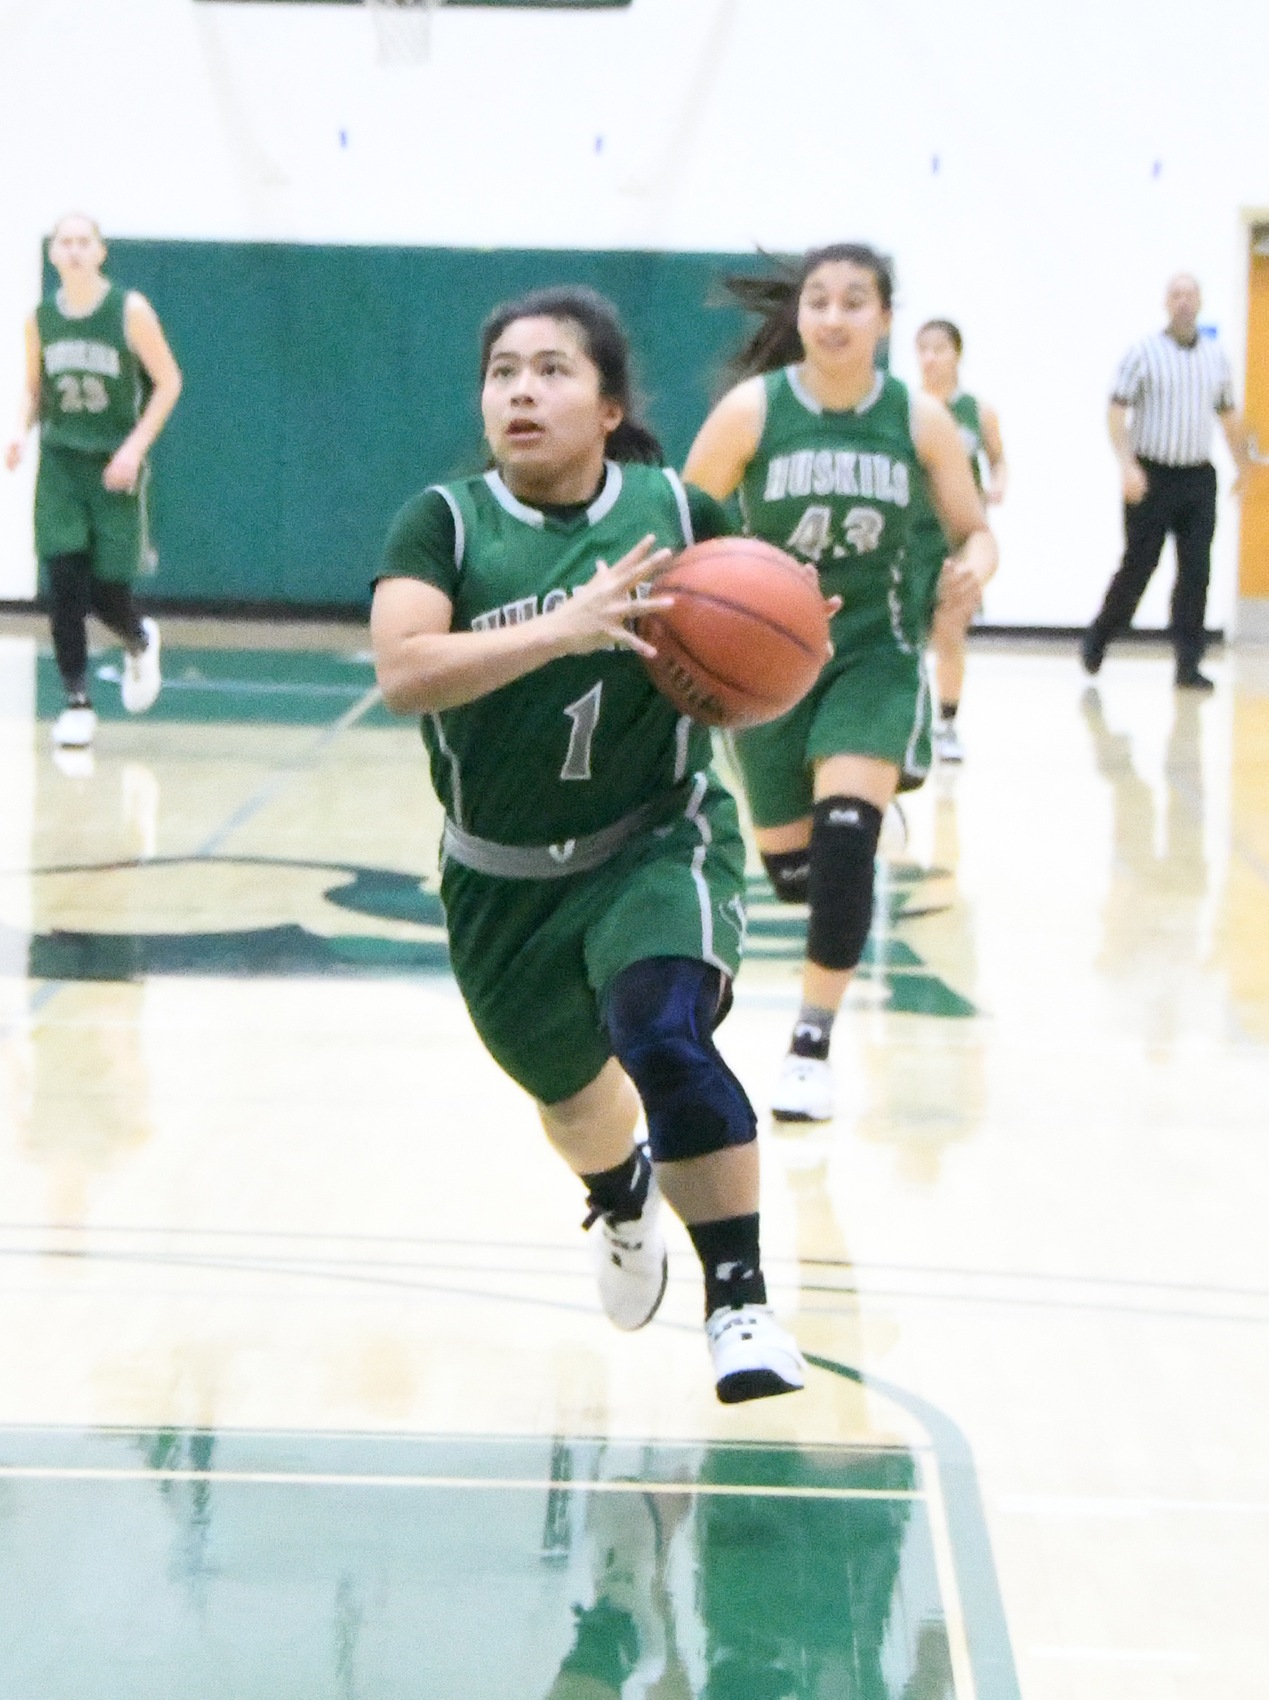 East Los Angeles College sophomore Farrah Castillo attempts a score in the paint in a 99-19 win vs. Imperial Valley College. (Photo by DeeDee Jackson)